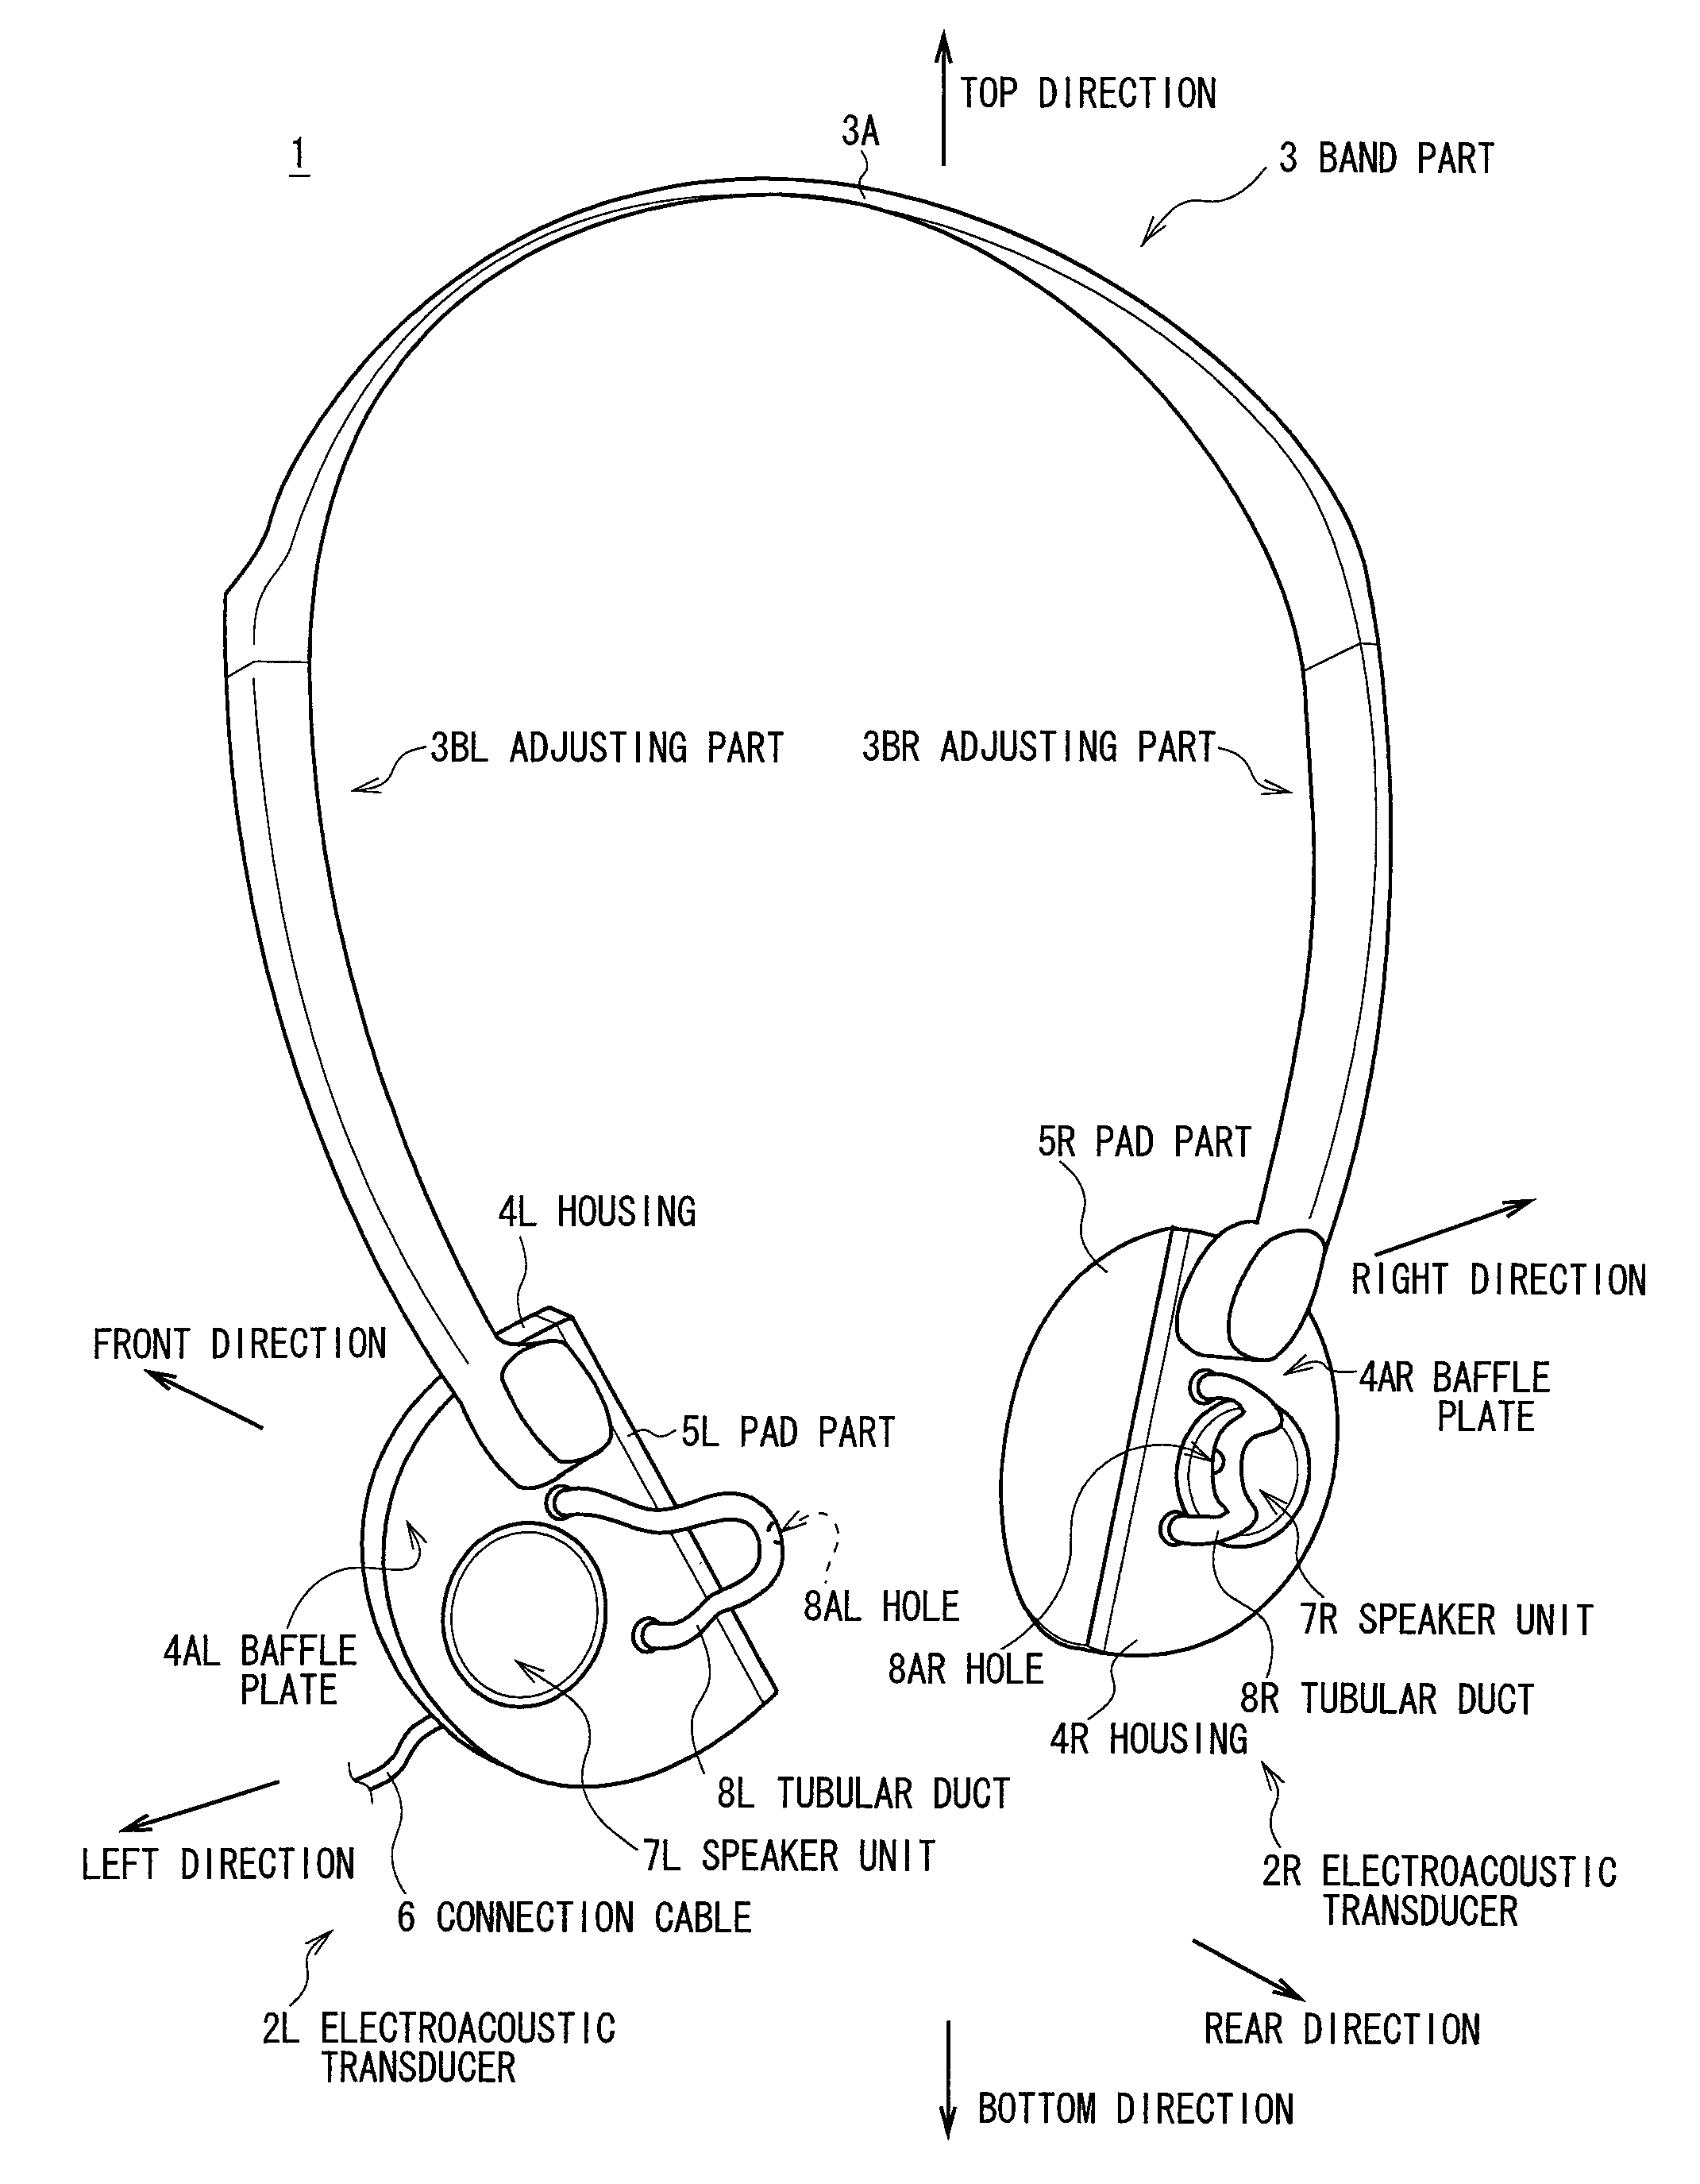 Electroacoustic transducer and ear speaker device